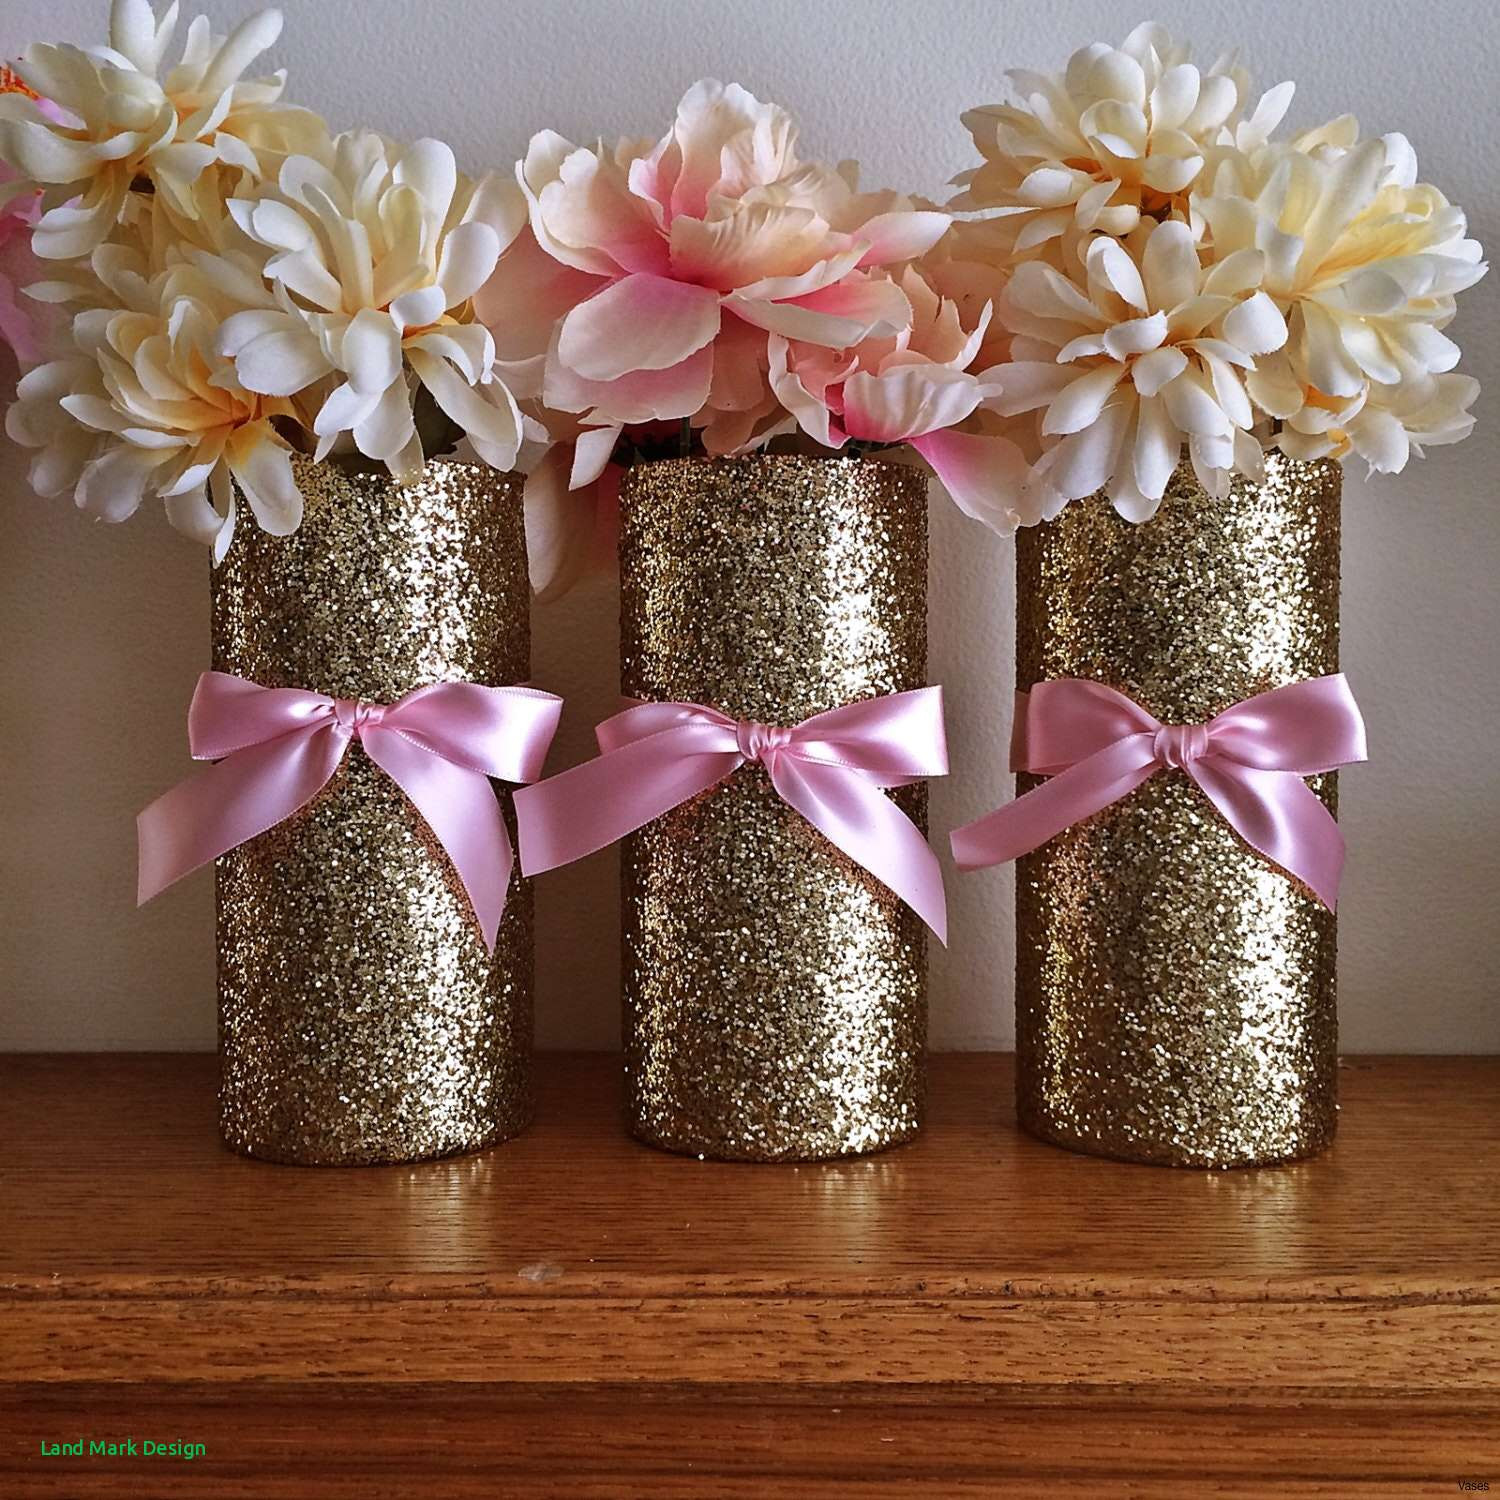 22 Best Mason Jar Photo Vase 2024 free download mason jar photo vase of gold mason jar design home design with vases baby 3 gold wedding pink and shower centerpieces centerpiecei 0d